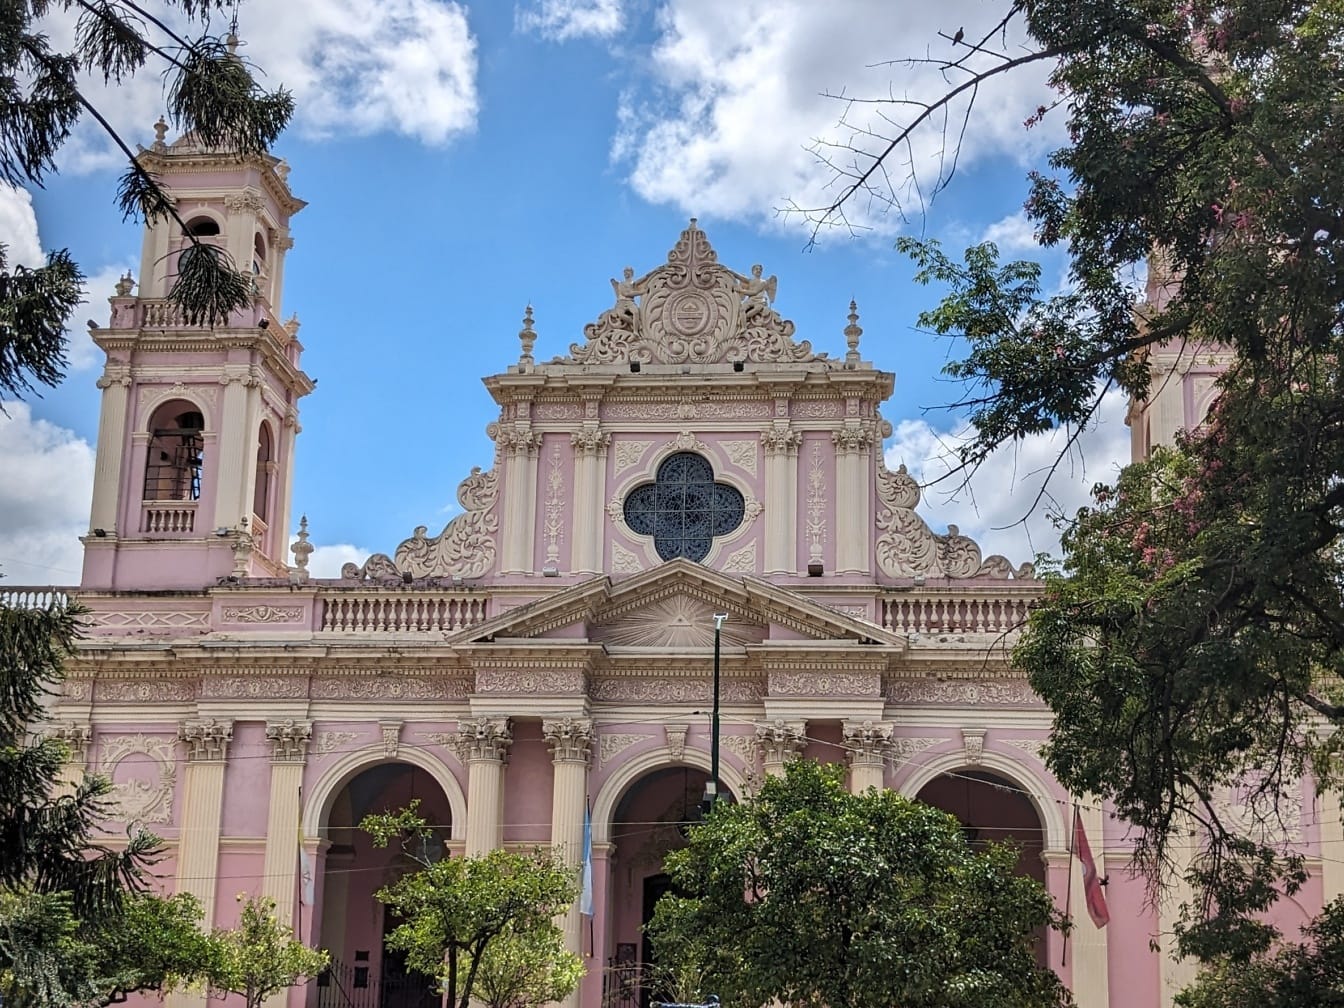 Salta cathedral in the city park, at the plaza called the Square of July 9th in Argentina